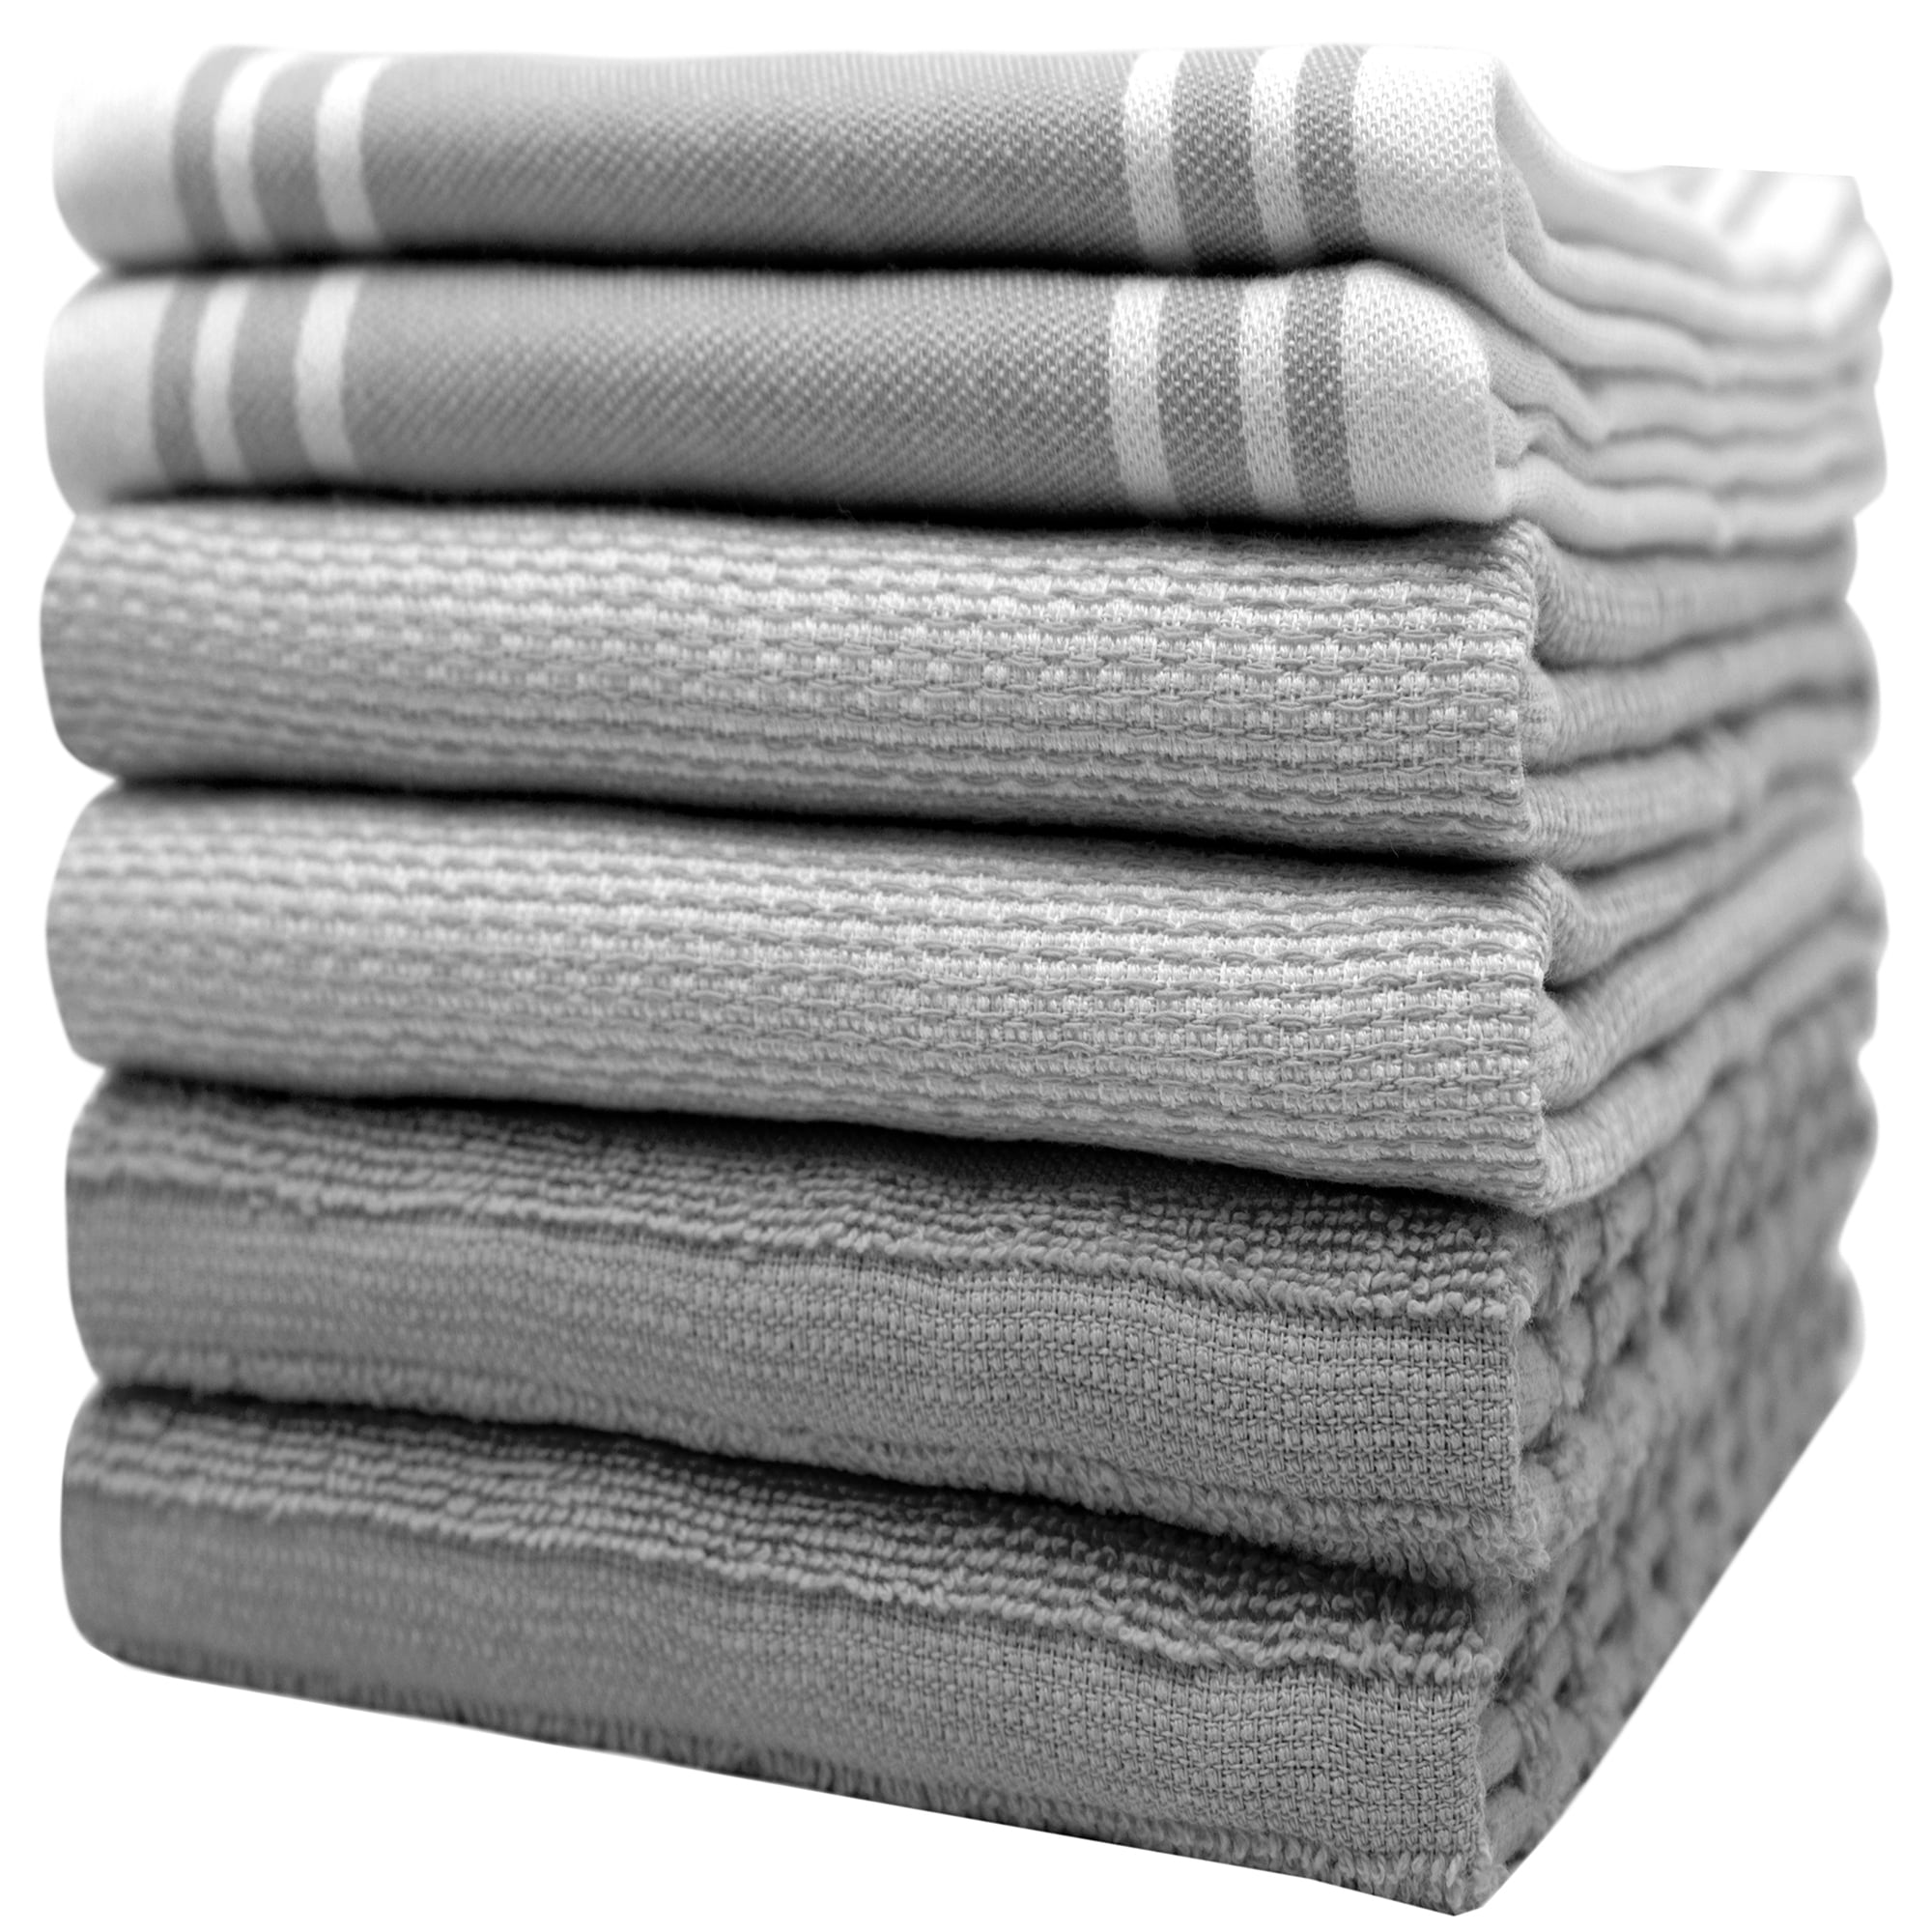 Amour Infini Classic Stripe Kitchen Dish Towels | 4 Pack | 28 x 20 inch, Over Sized | Multi-Use Kitchen Towels |100% Ring Spun Premium Cotton | Highly